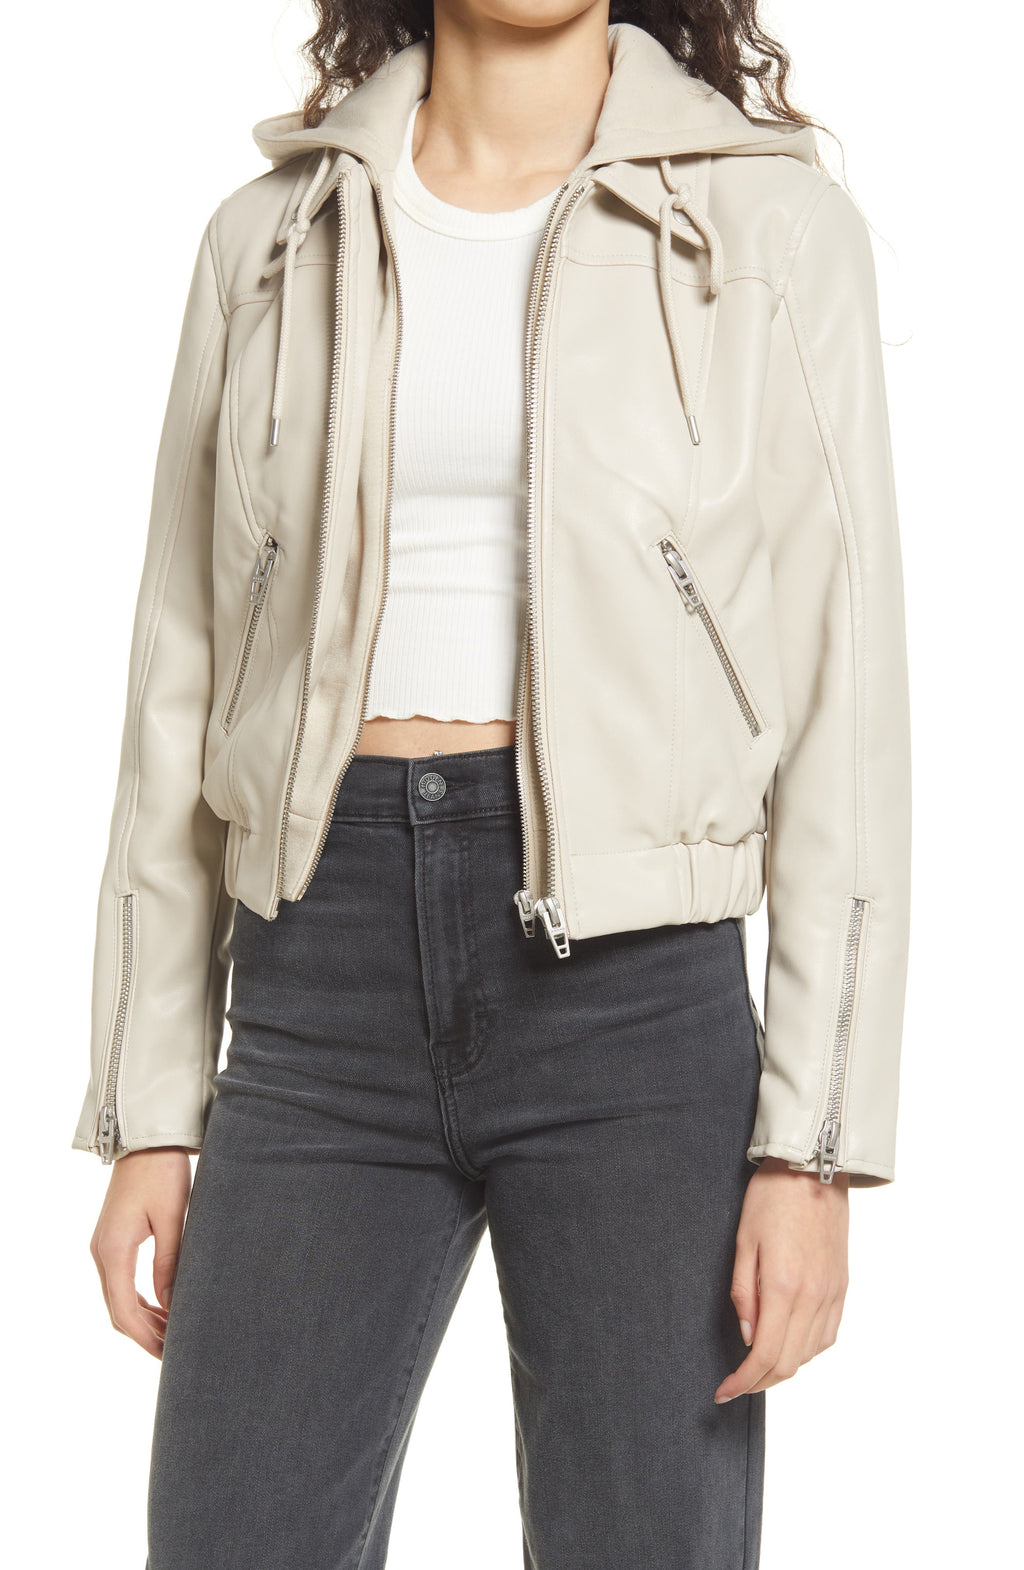 BLANKNYC Faux Leather Bomber Jacket with Removable Hood, Main, color, ON ME